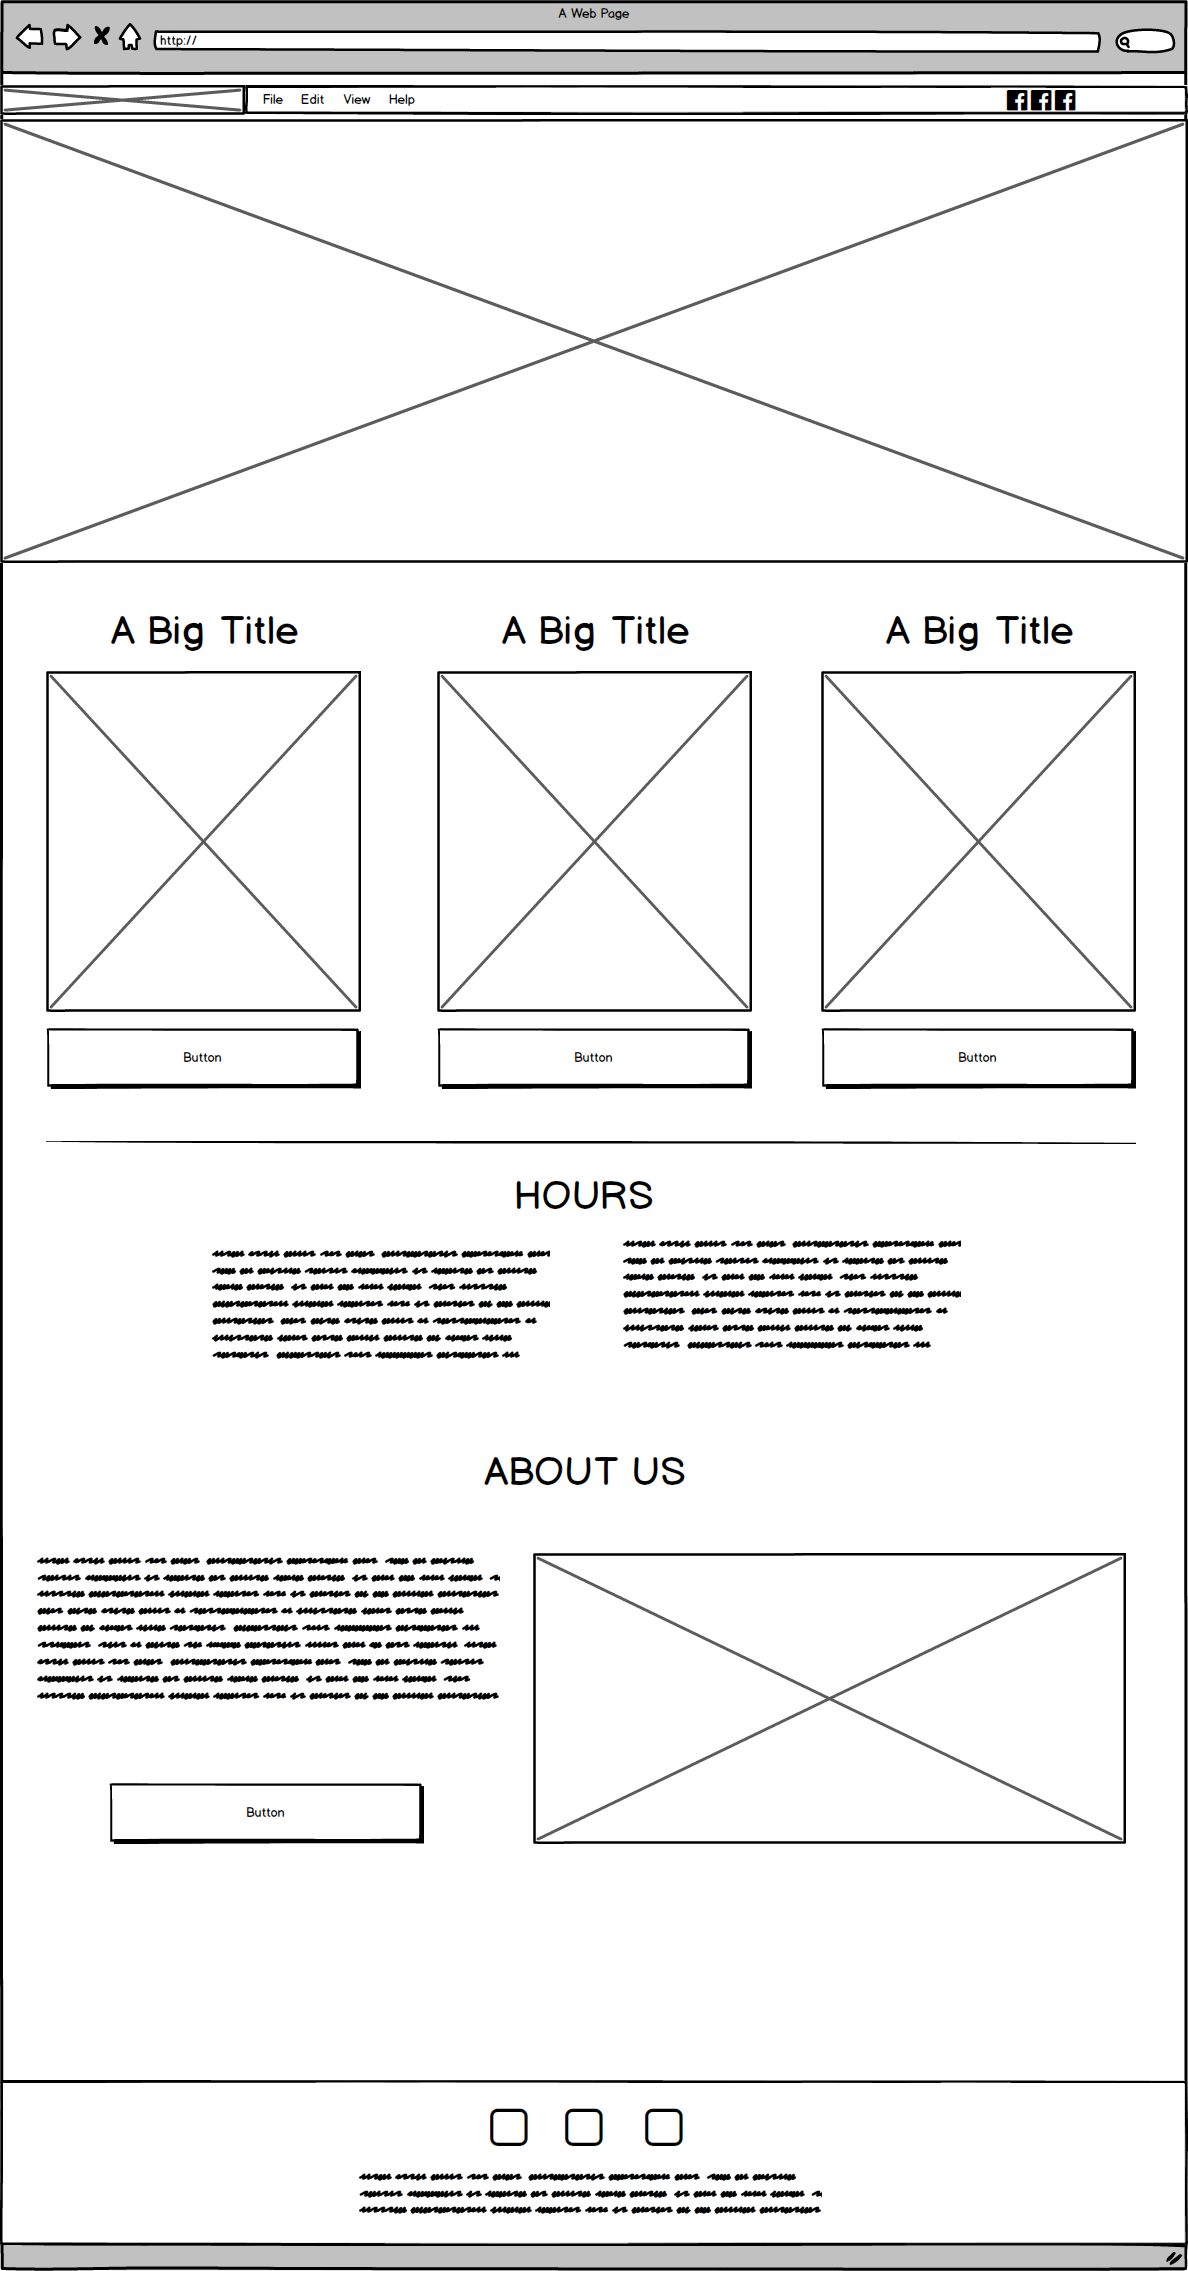 Everything you need to know about mobile app wireframing | DECODE